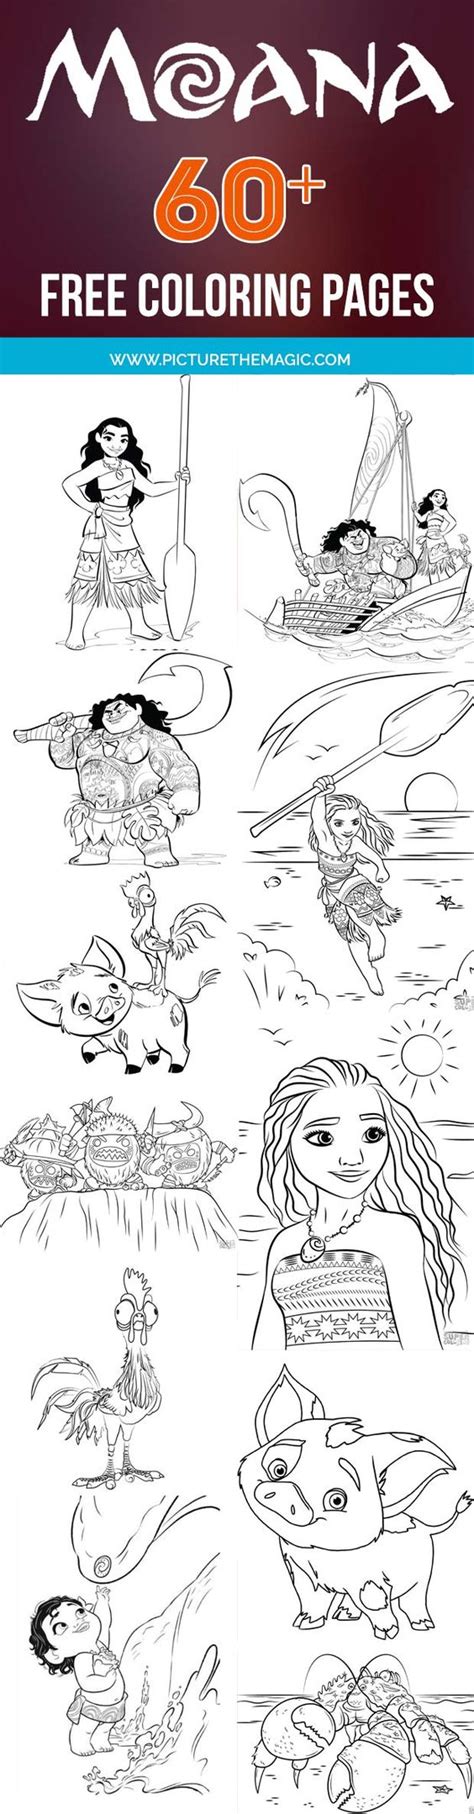 We've even included coloring sheets of. Free Moana Coloring Pages